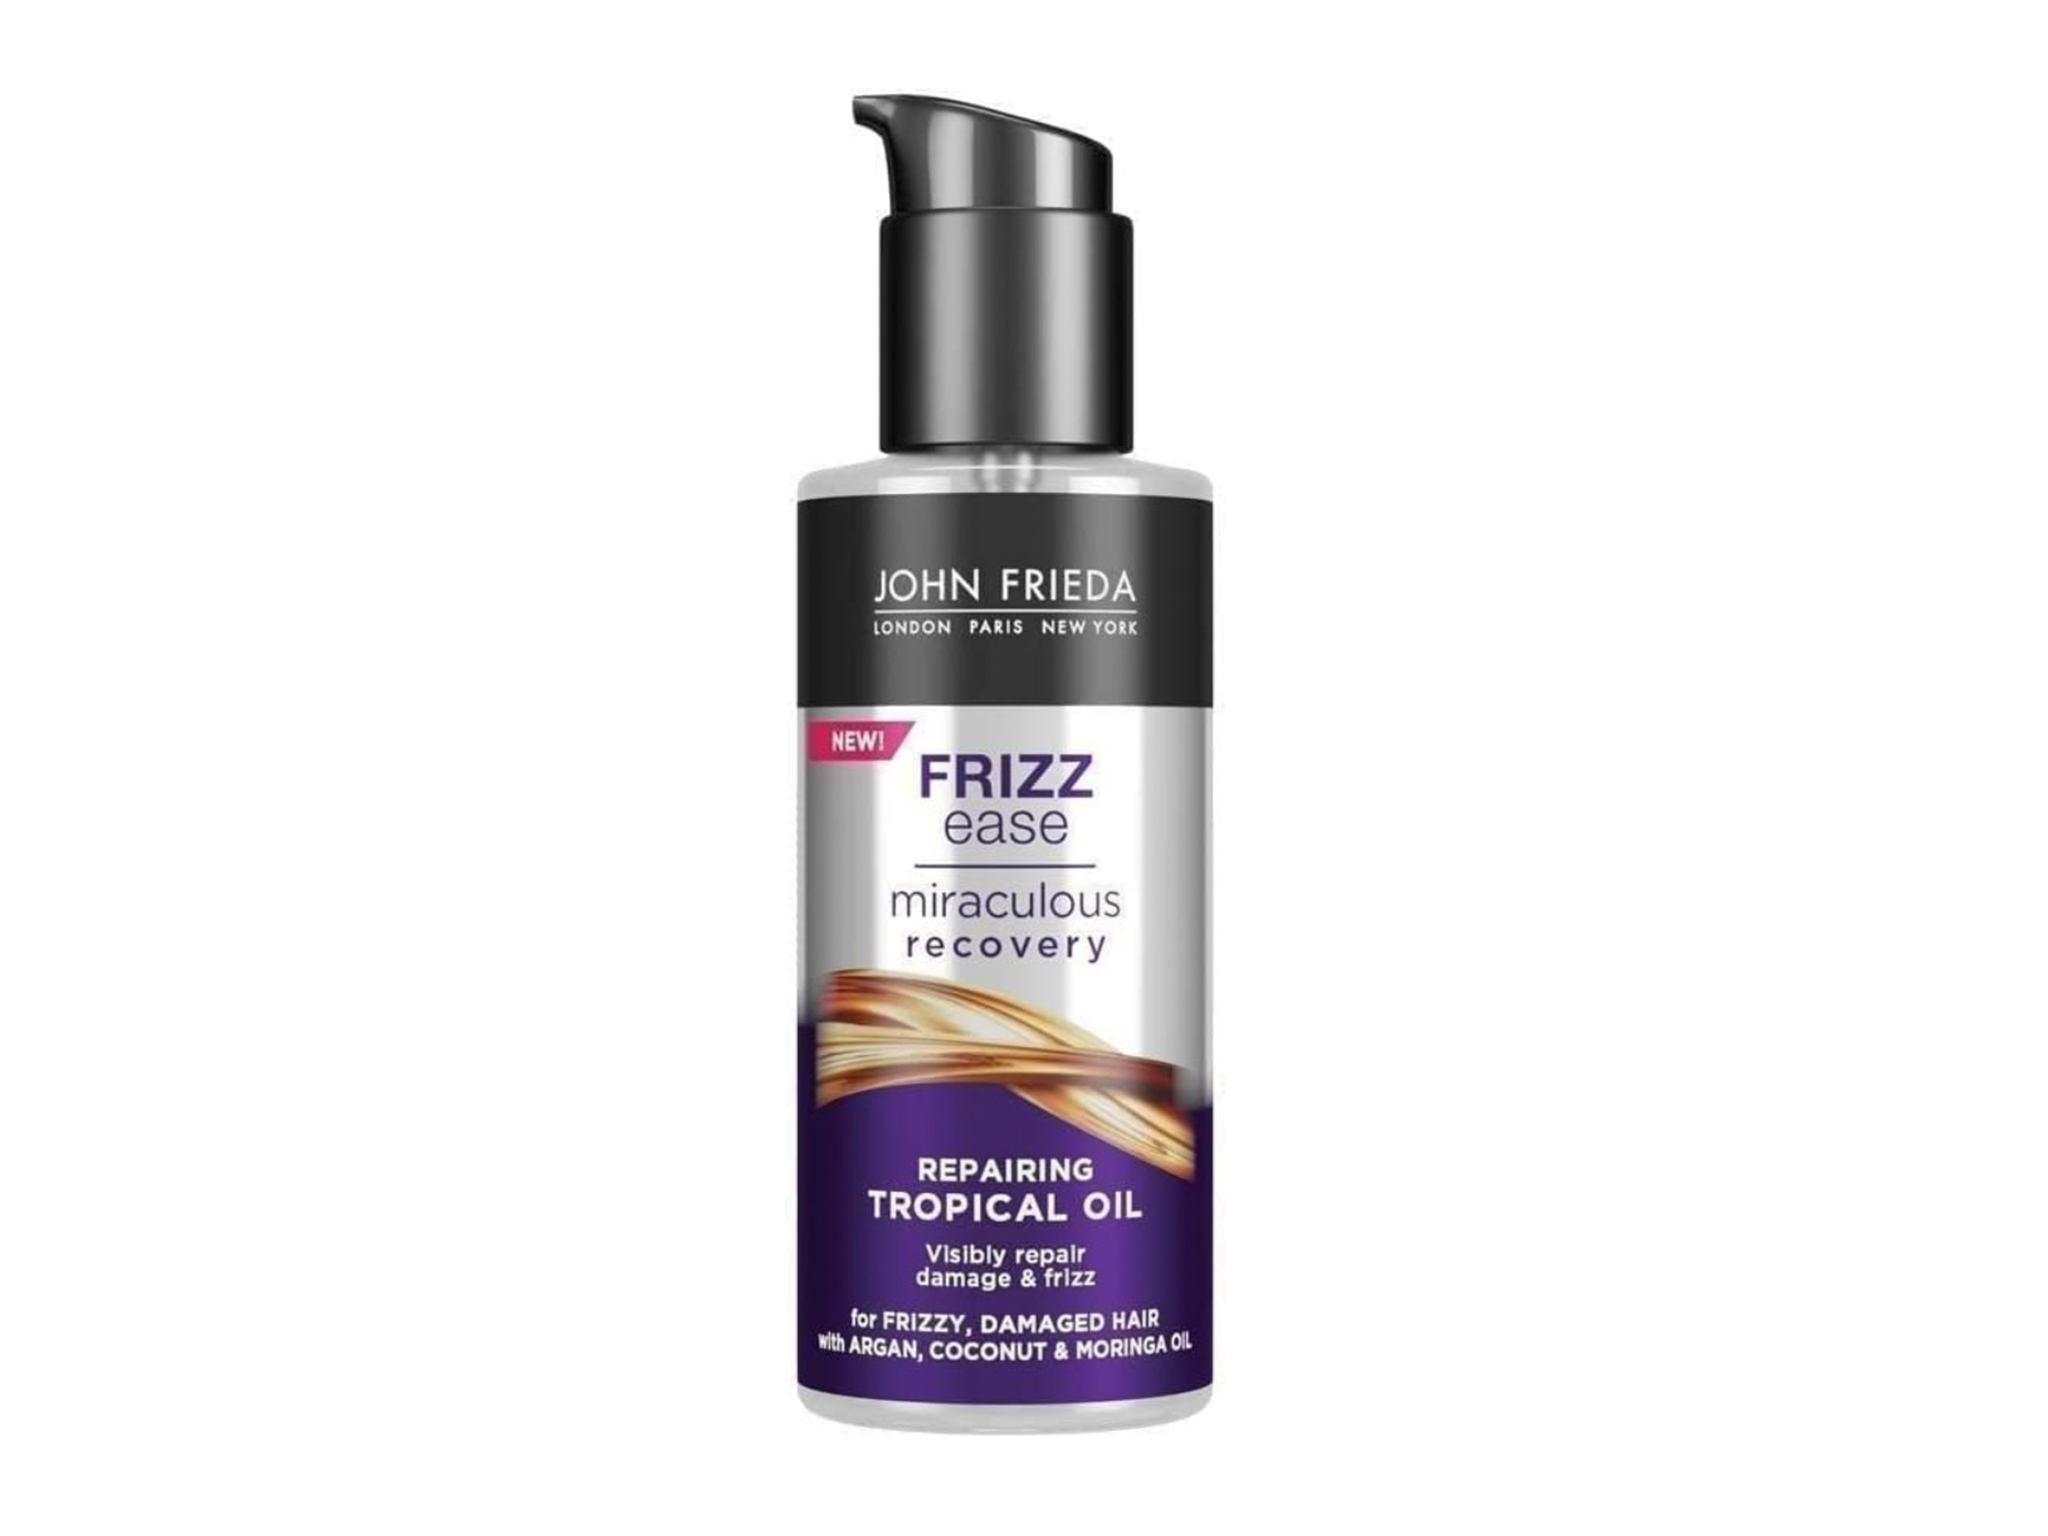 John Frieda frizz ease miraculous recovery oil review